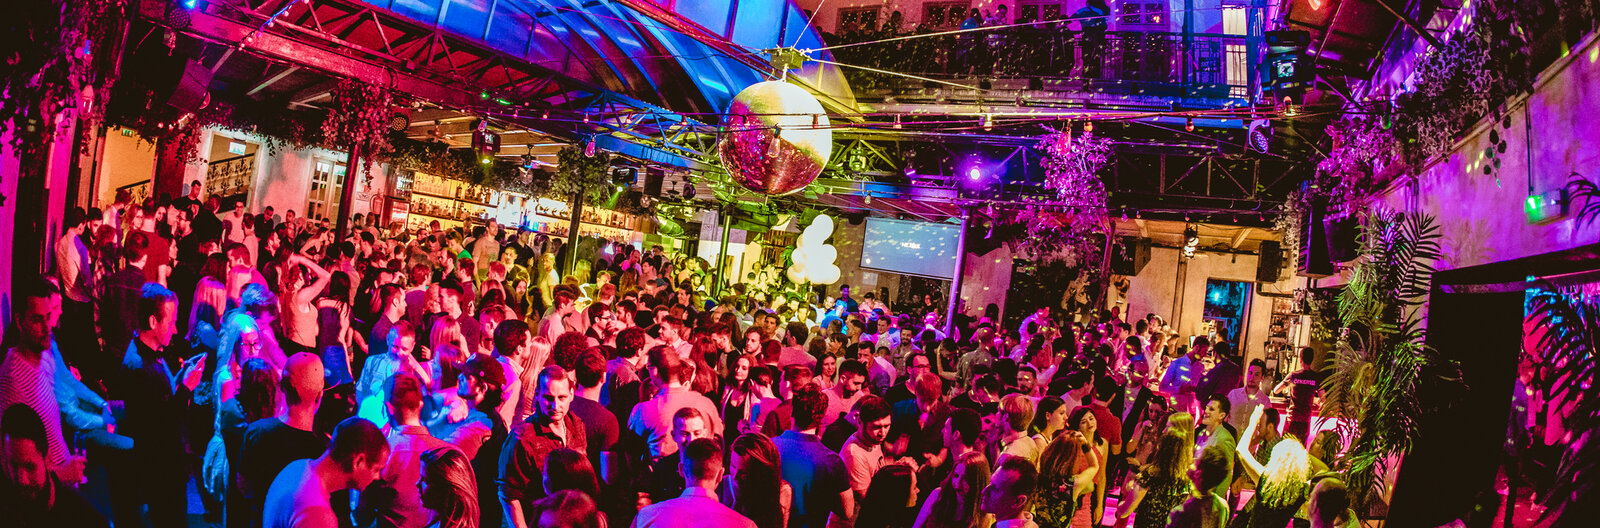 10 places where you can party during the week in Budapest